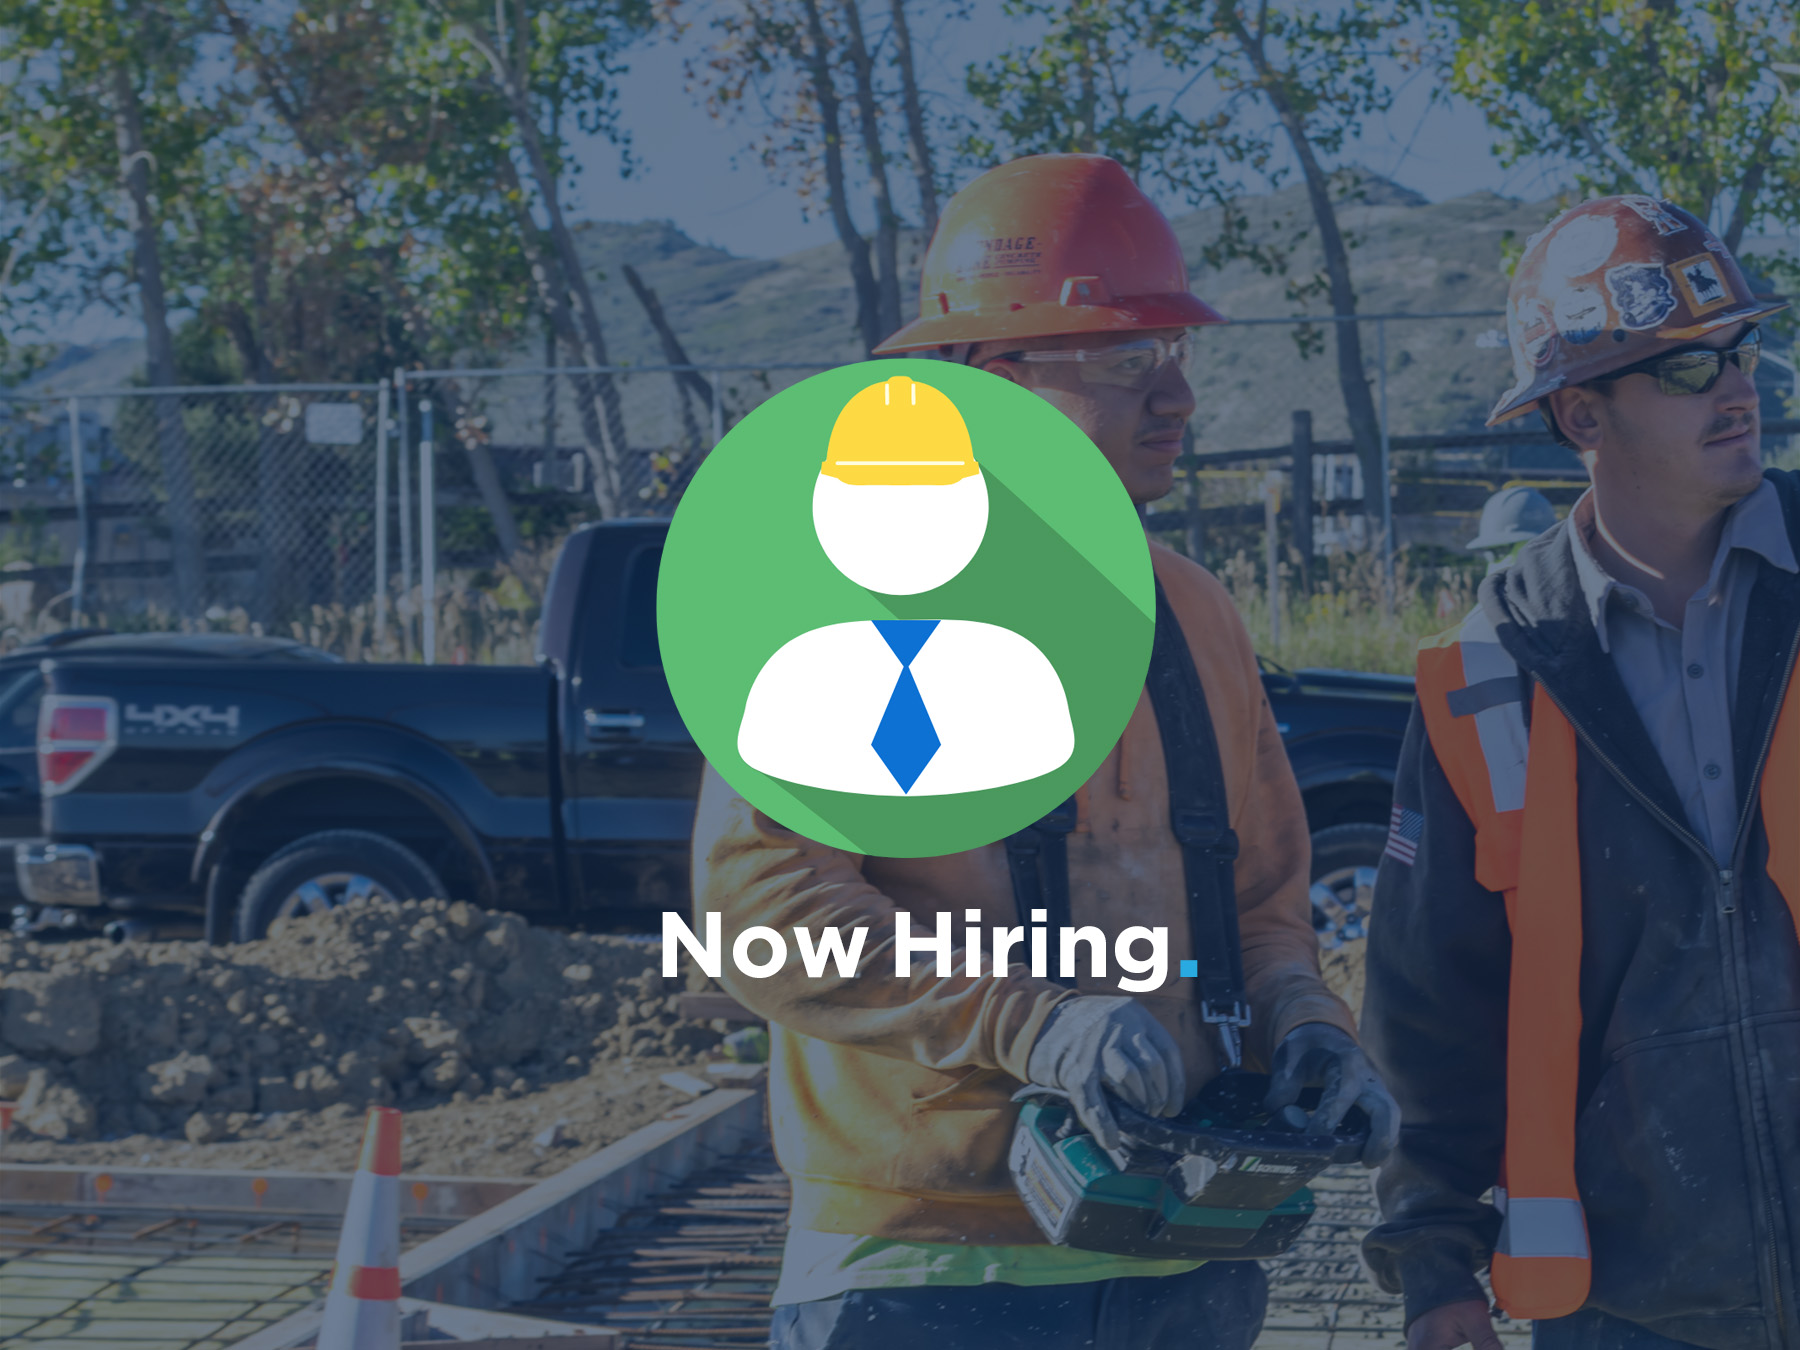 Symmetry Careers: Looking for Project Manager, Superintendent, & Estimator